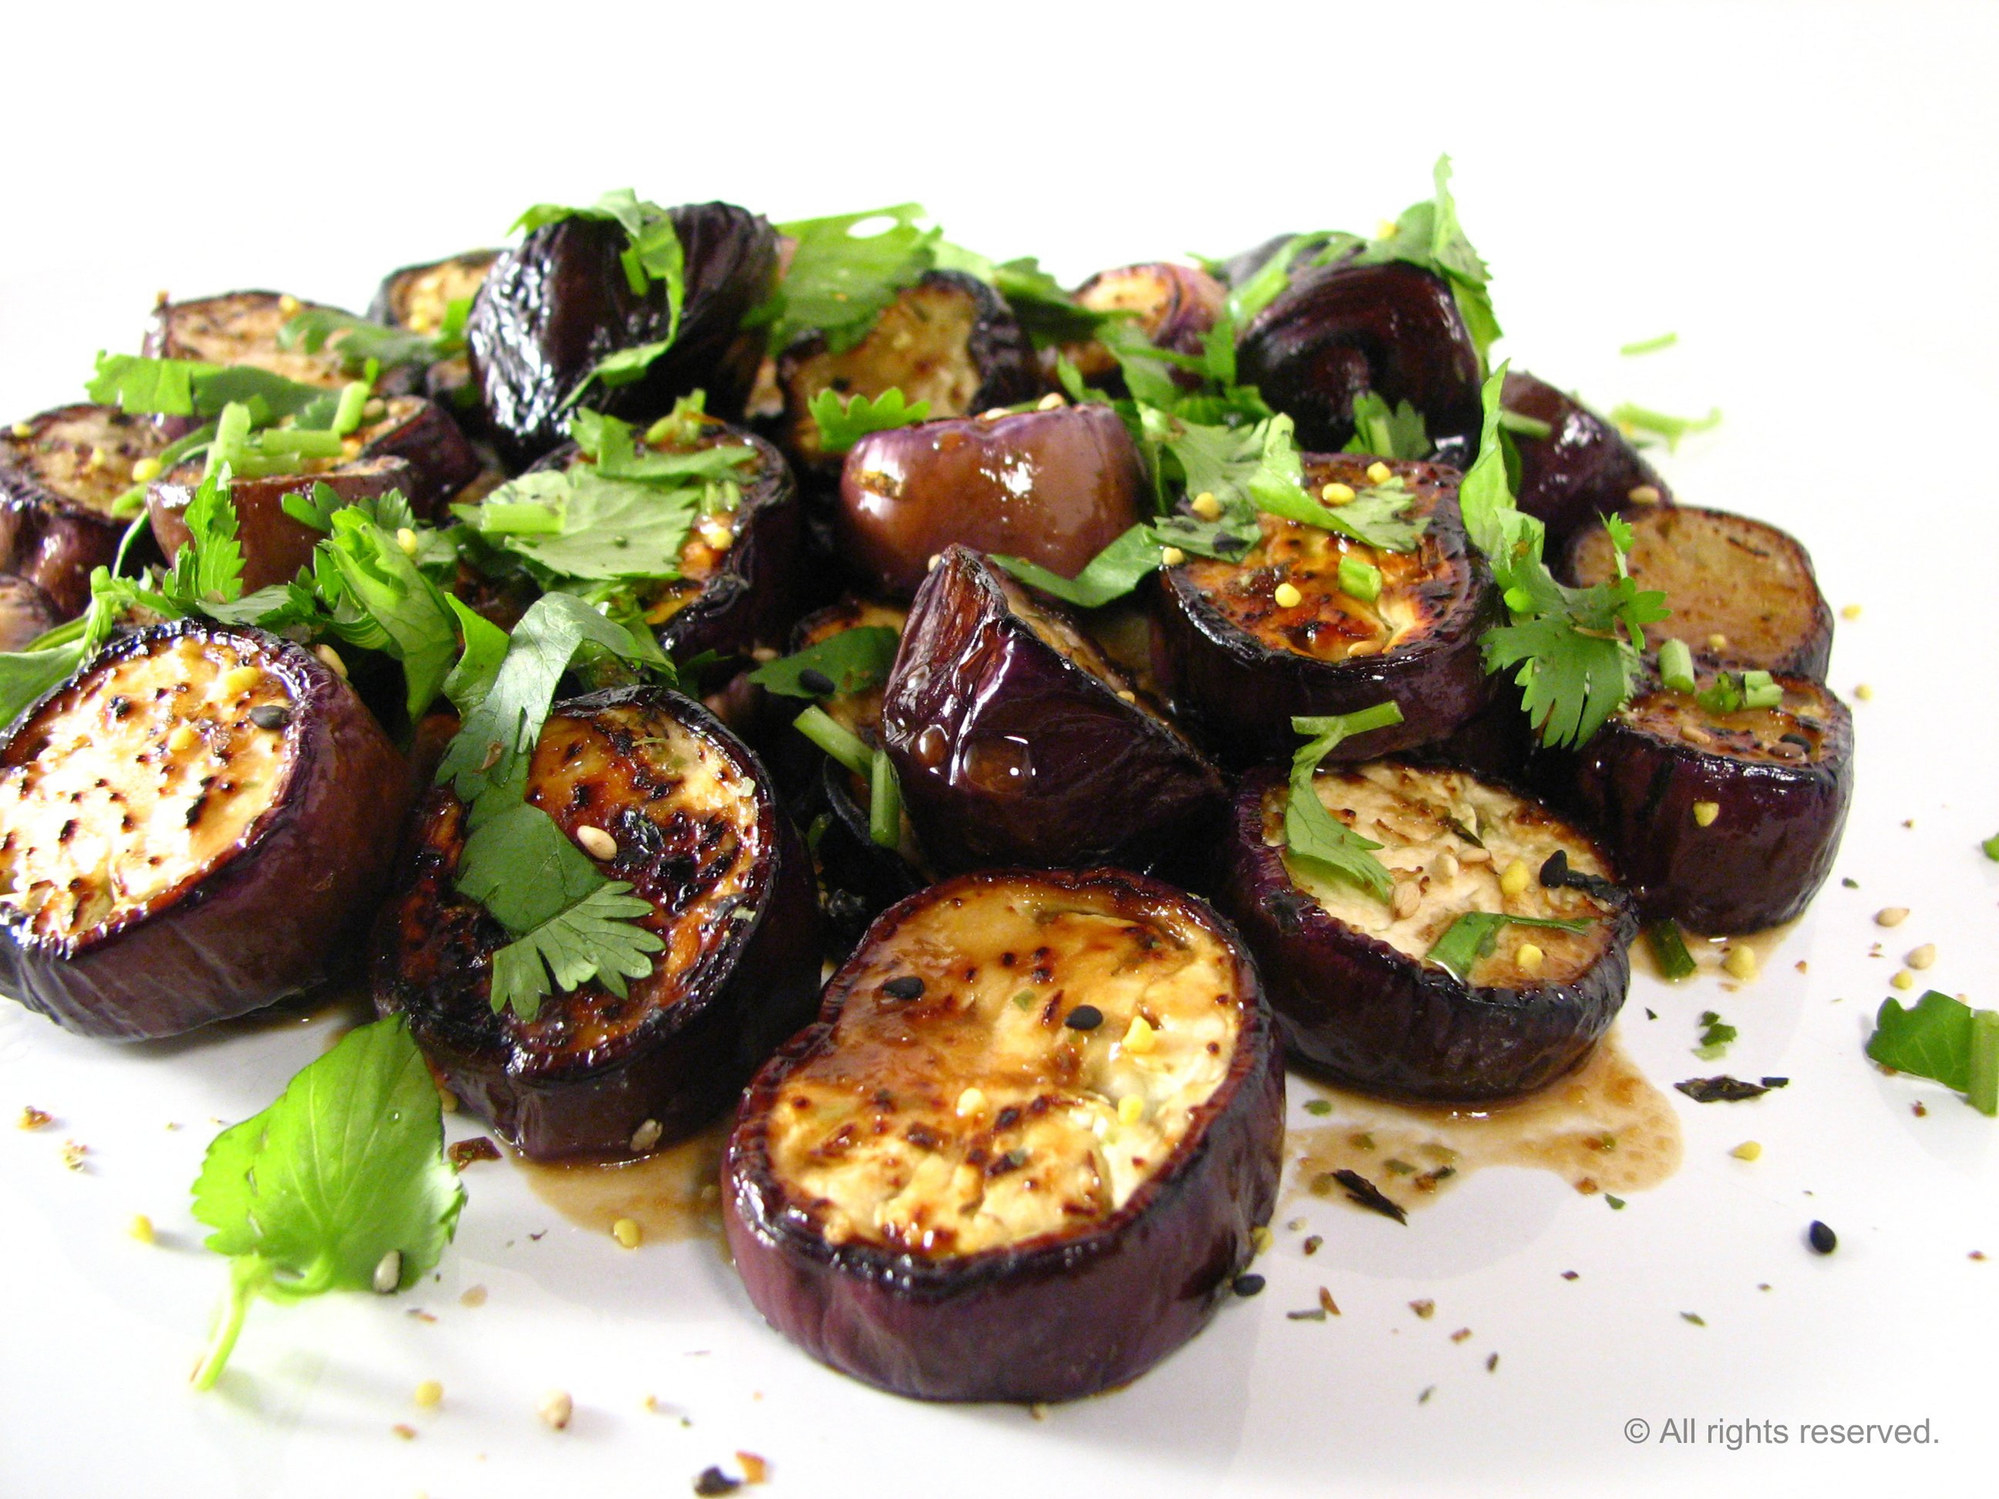 Pan-fried eggplant with herbs